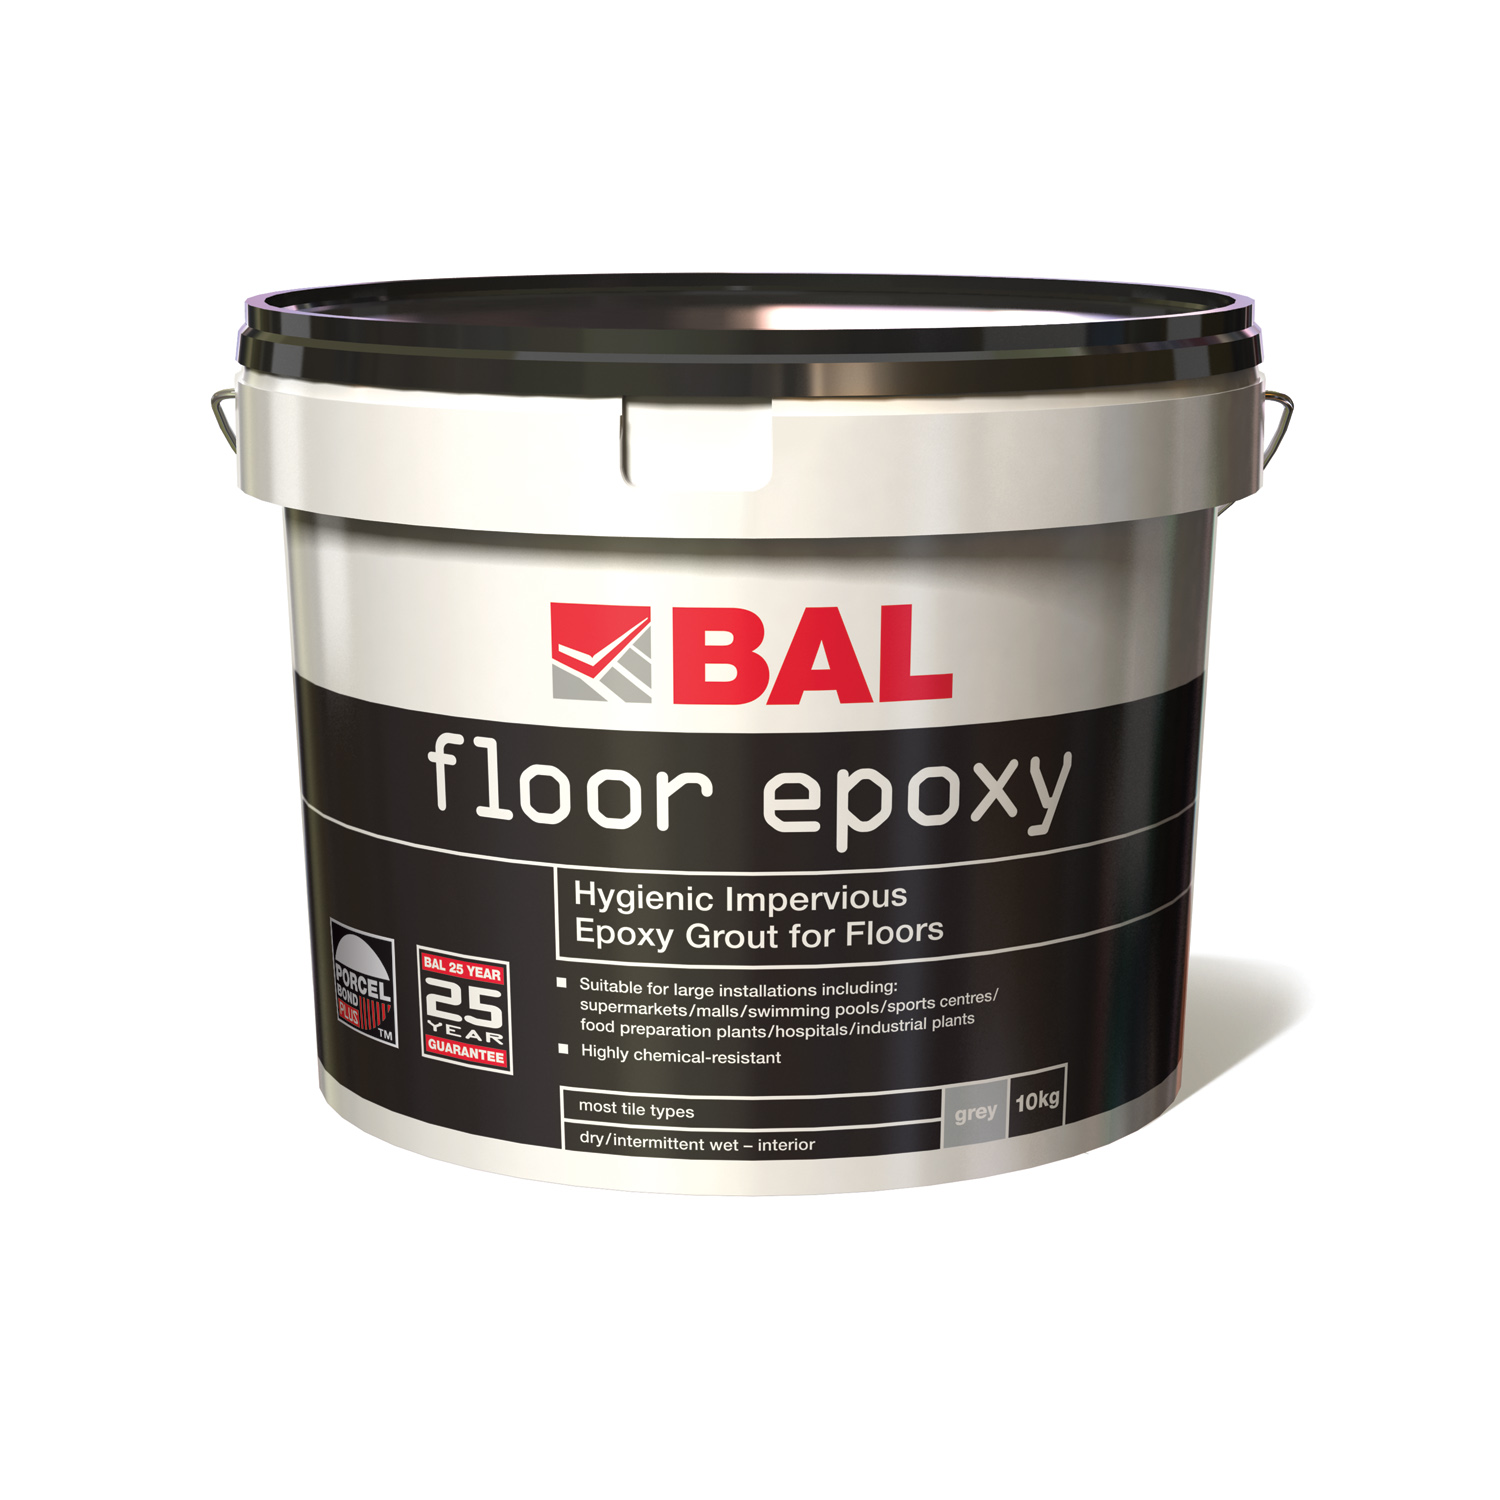 BAL launch a new improved epoxy grout